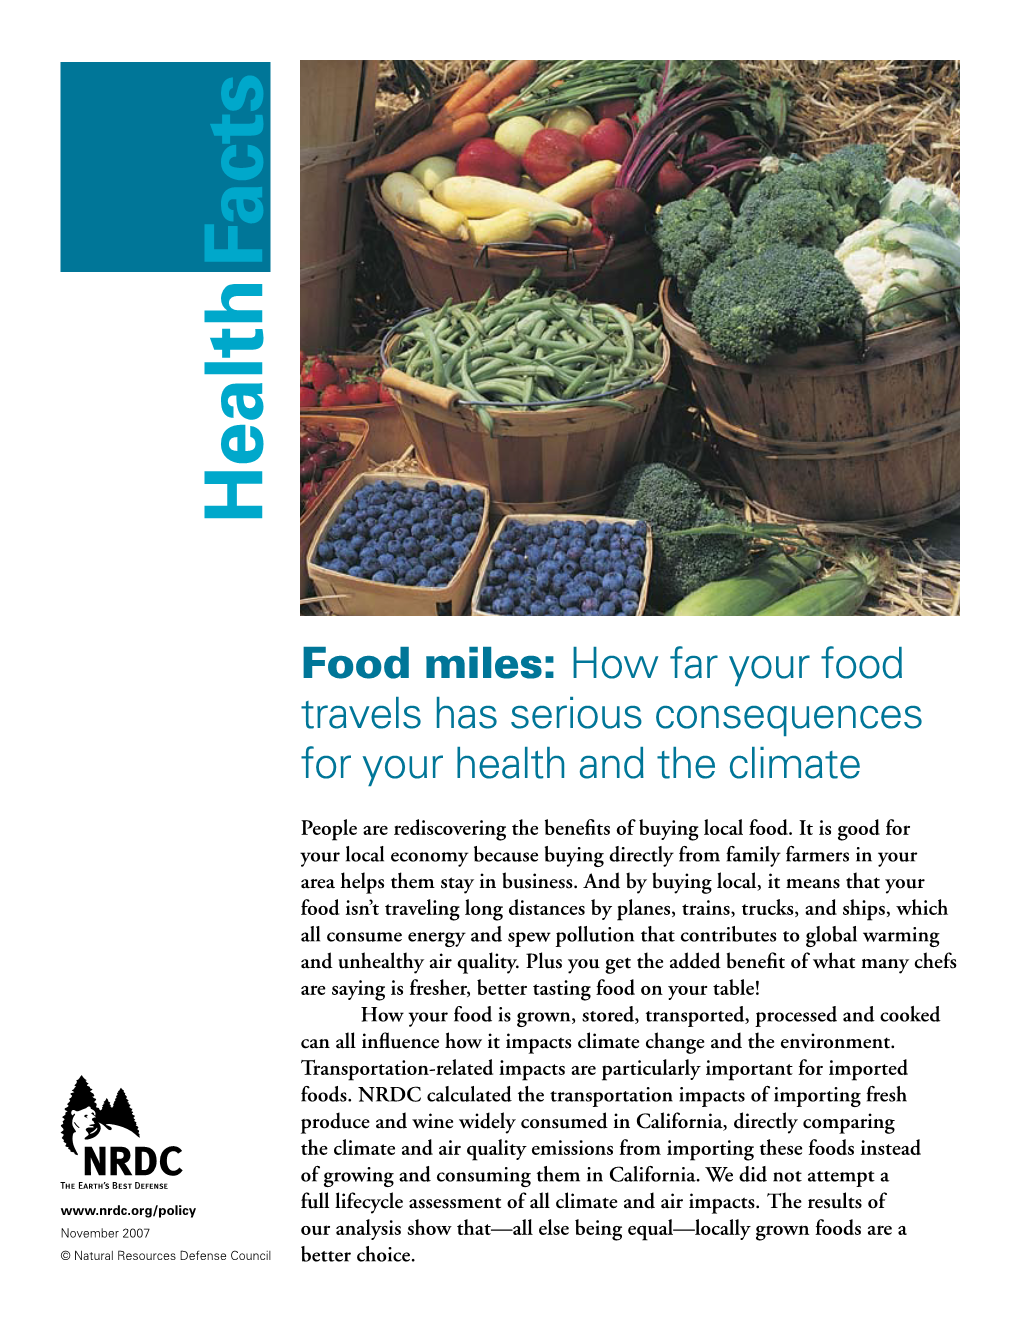 NRDC: Food Miles: How Far Your Food Travels Has Serious Consequences for Your Health and the Climate (Pdf)